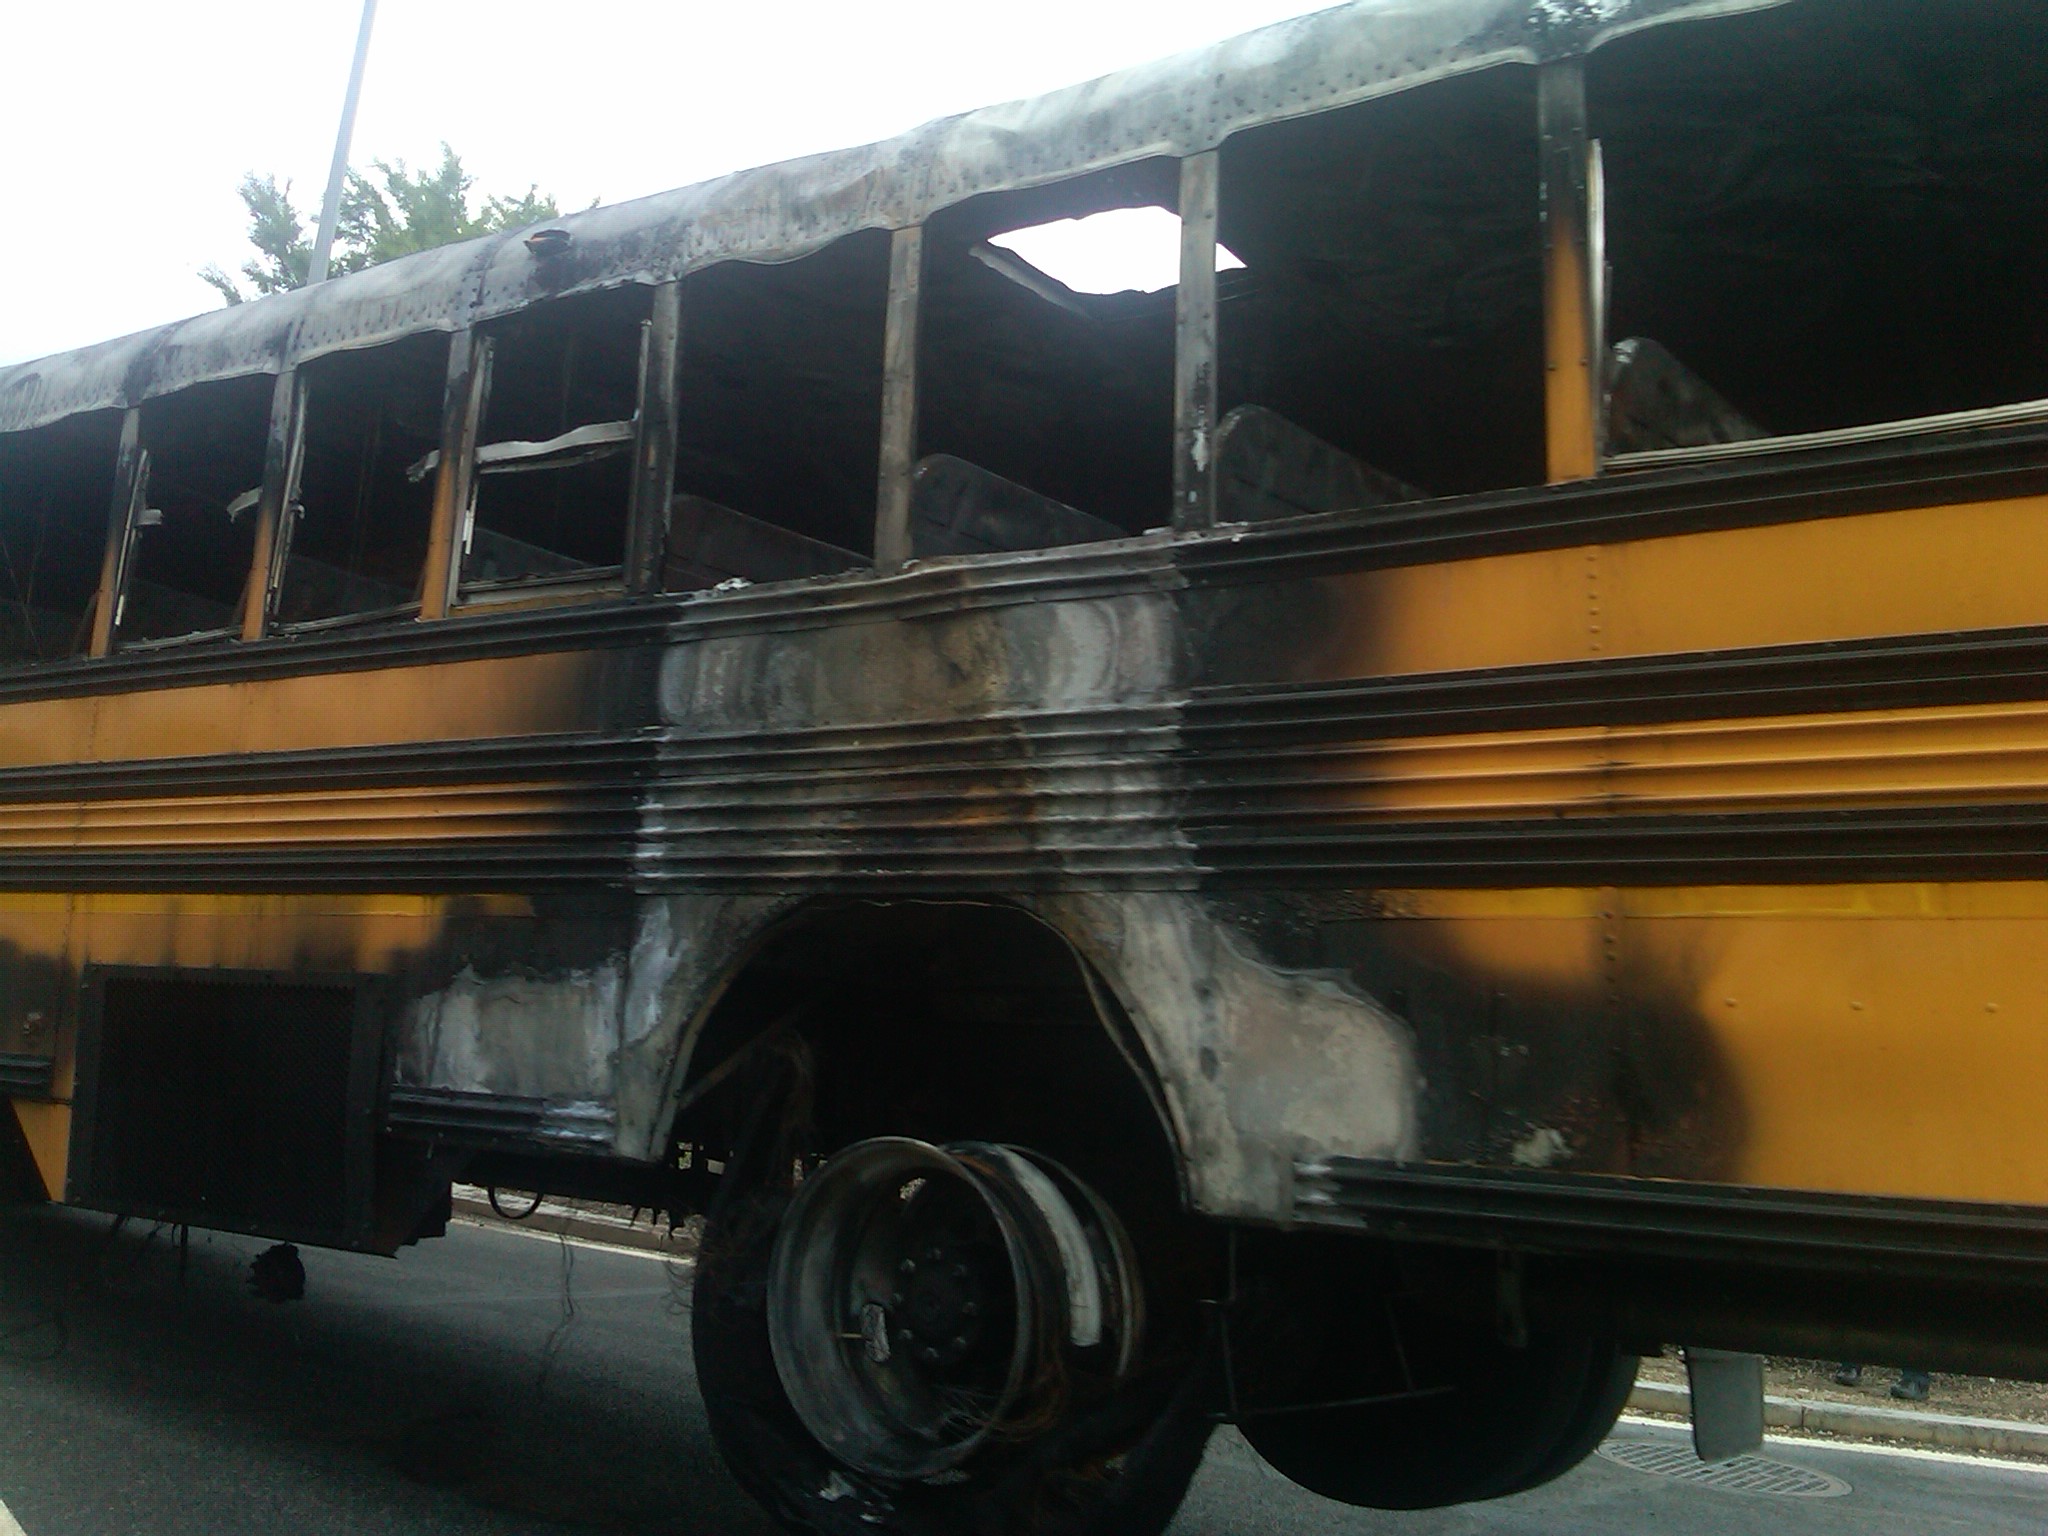 The+charred+bus+that+was+removed+from+the+Third+Street+Tunnel.